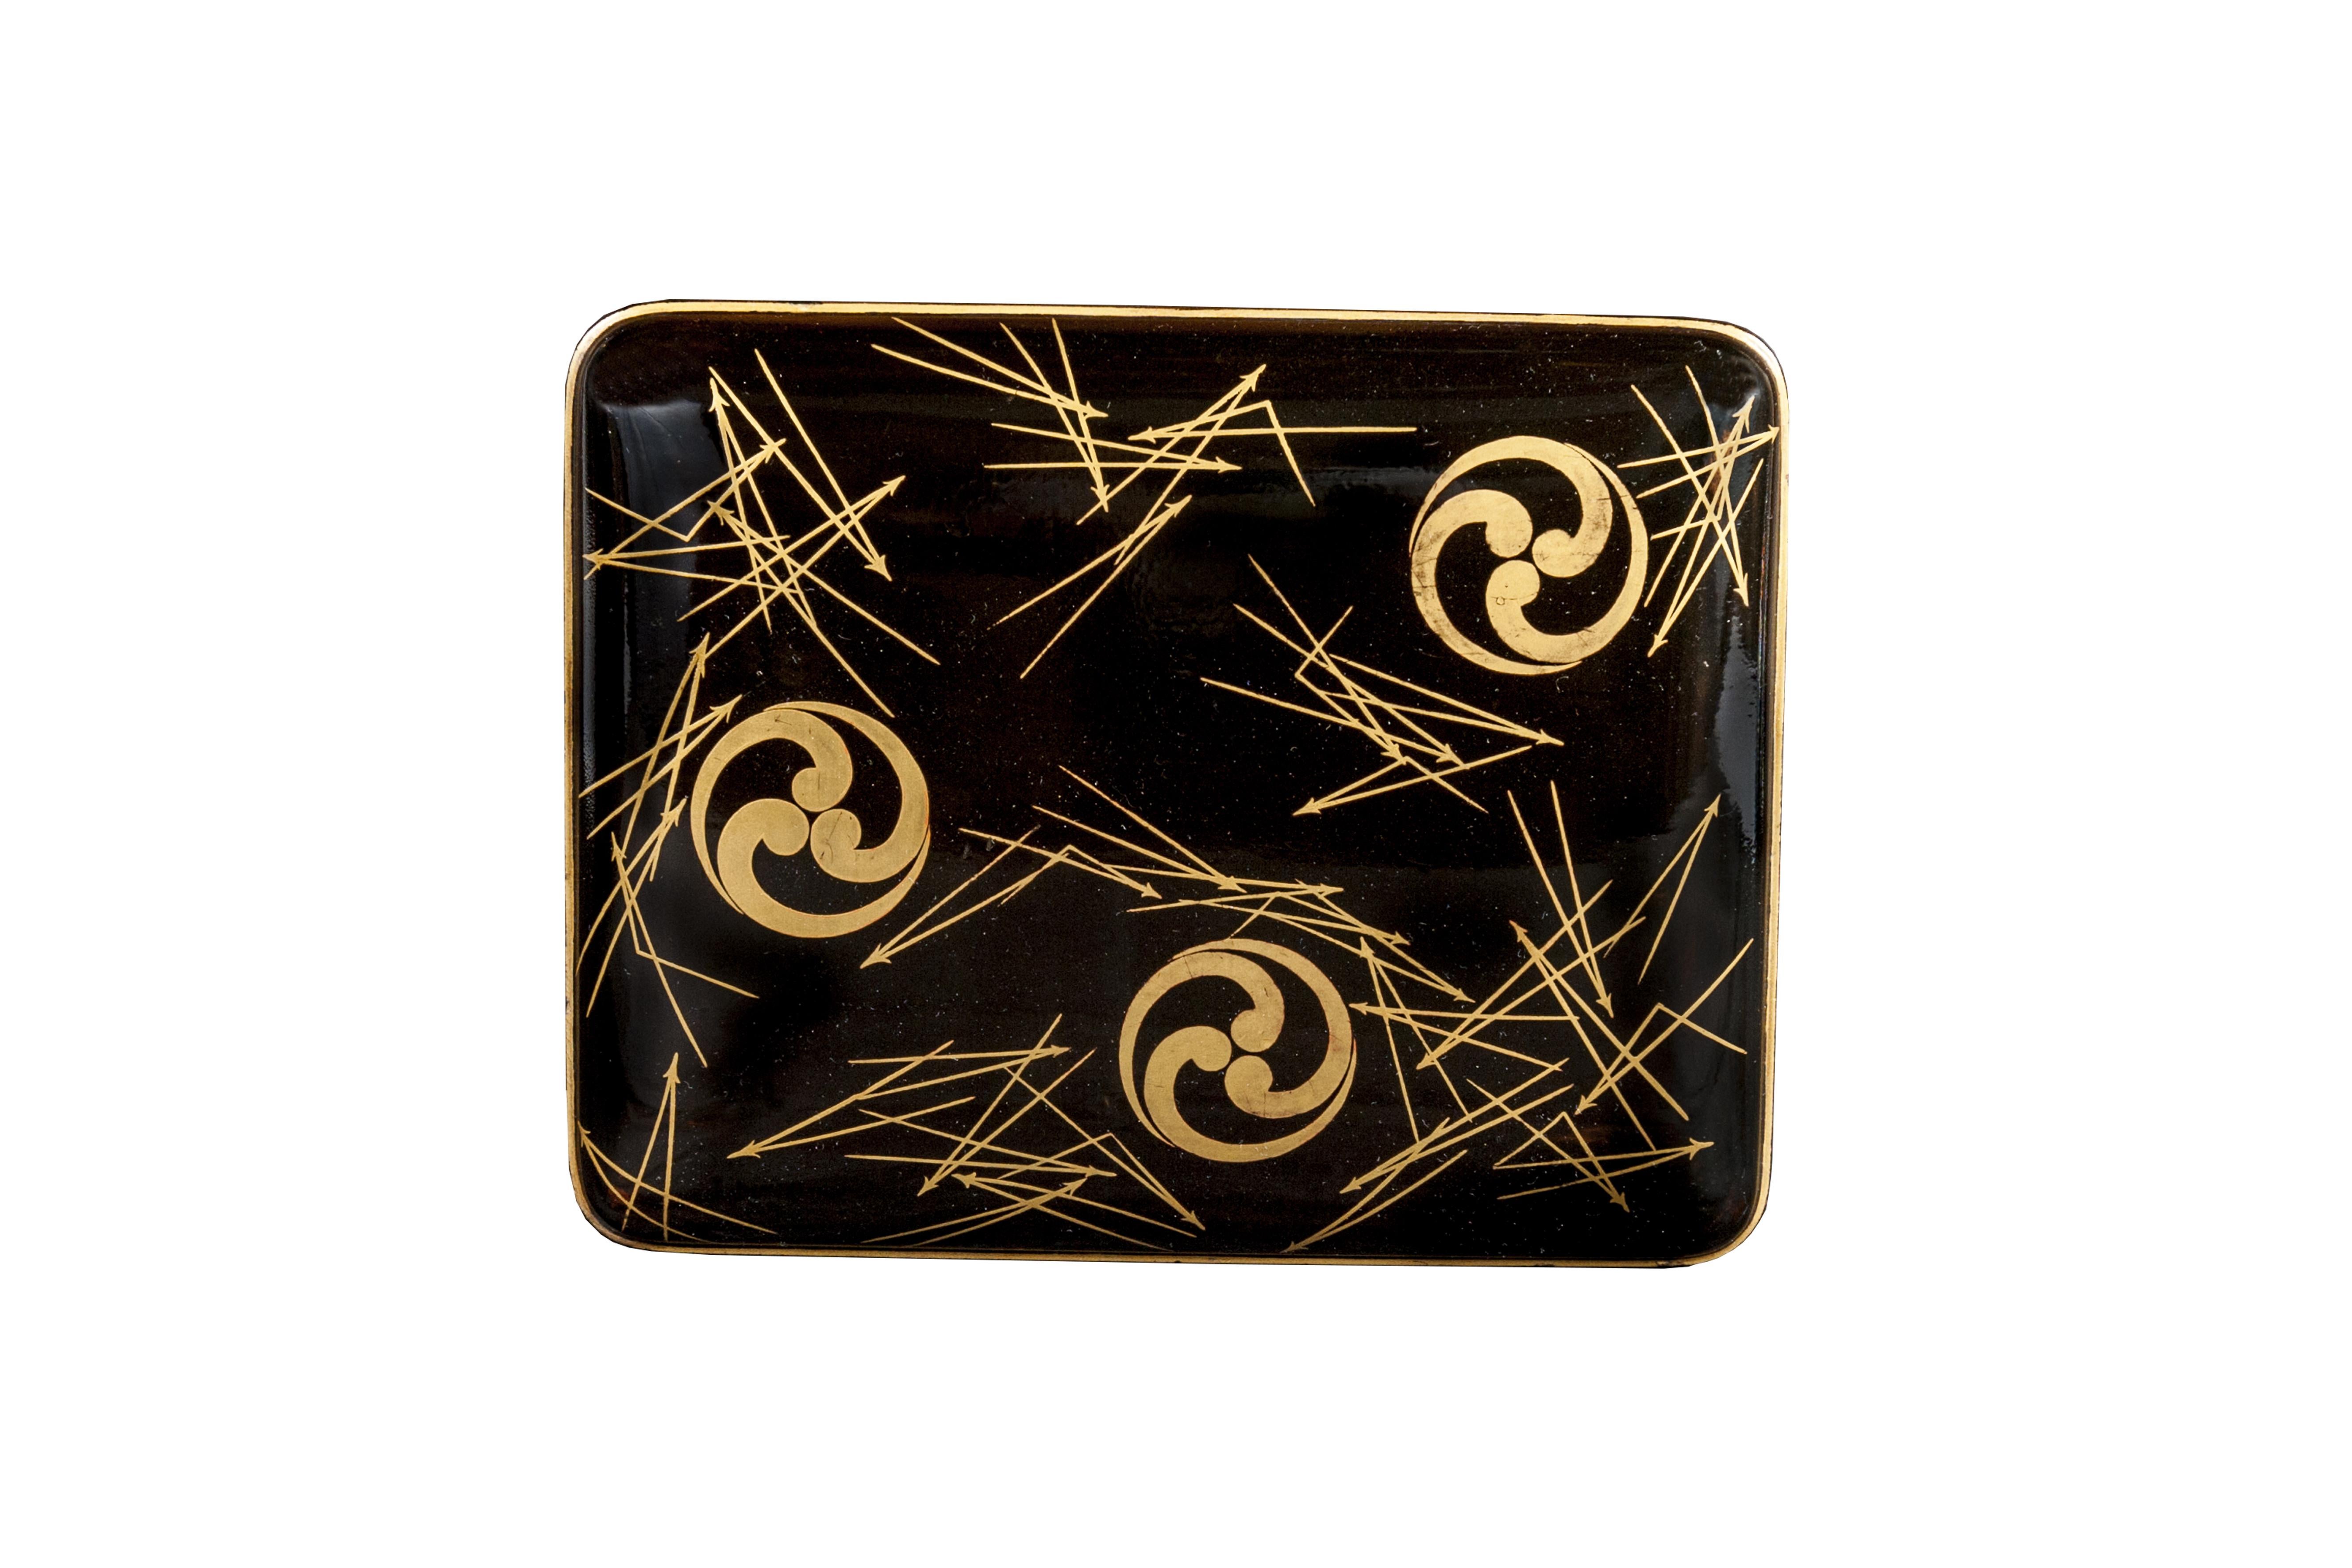 Kushibako (comb box) in black lacquer with gold lacquer decoration of arrows and my in the shape of three assembled commas 